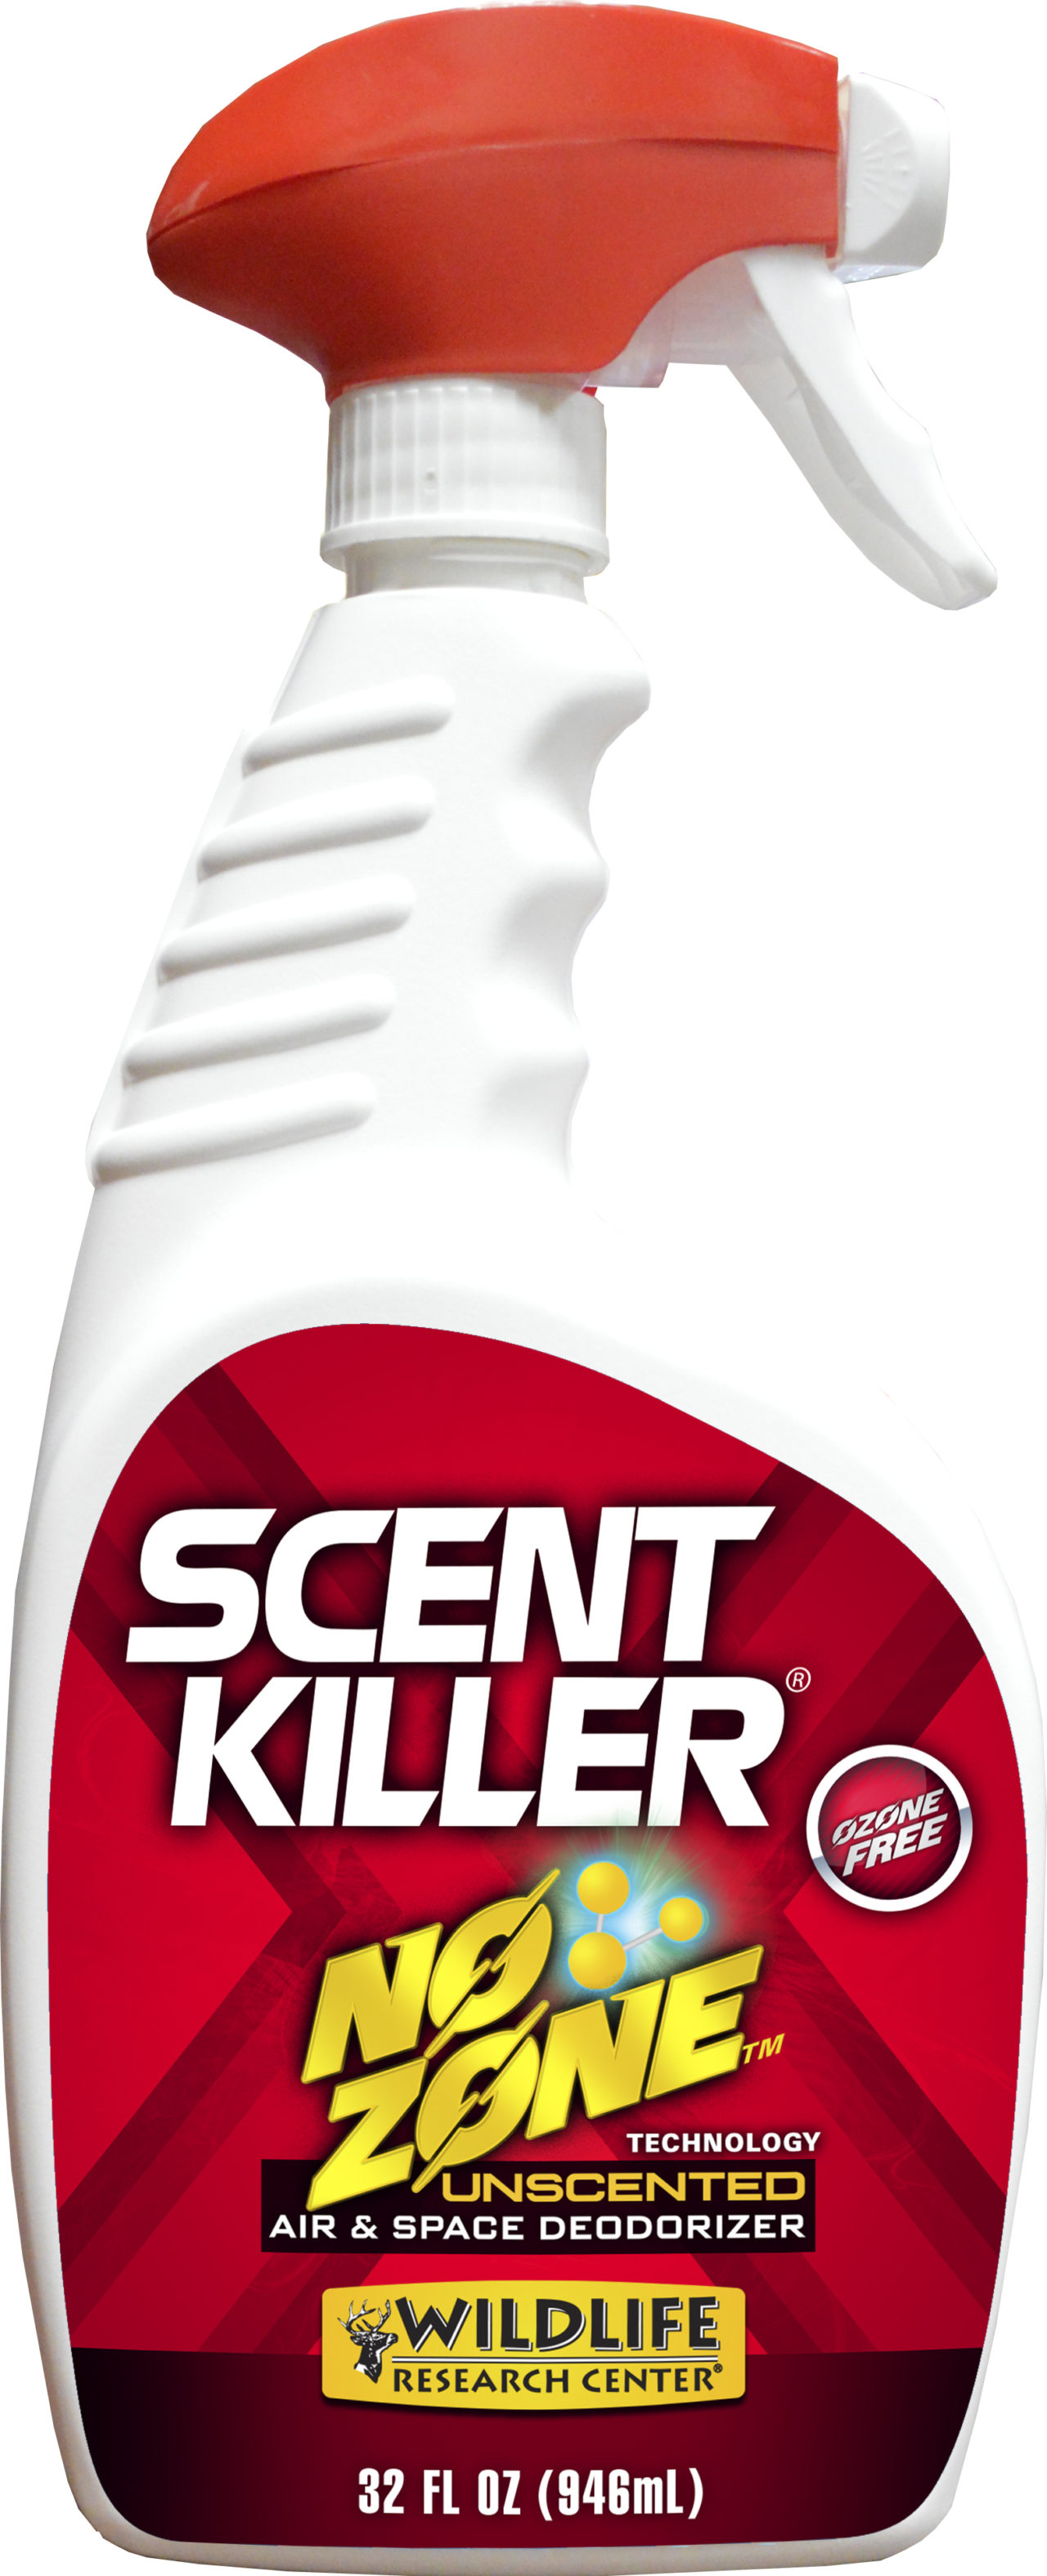 Scent Killer Air & Space Deodorizer With – NO ZONE Technology